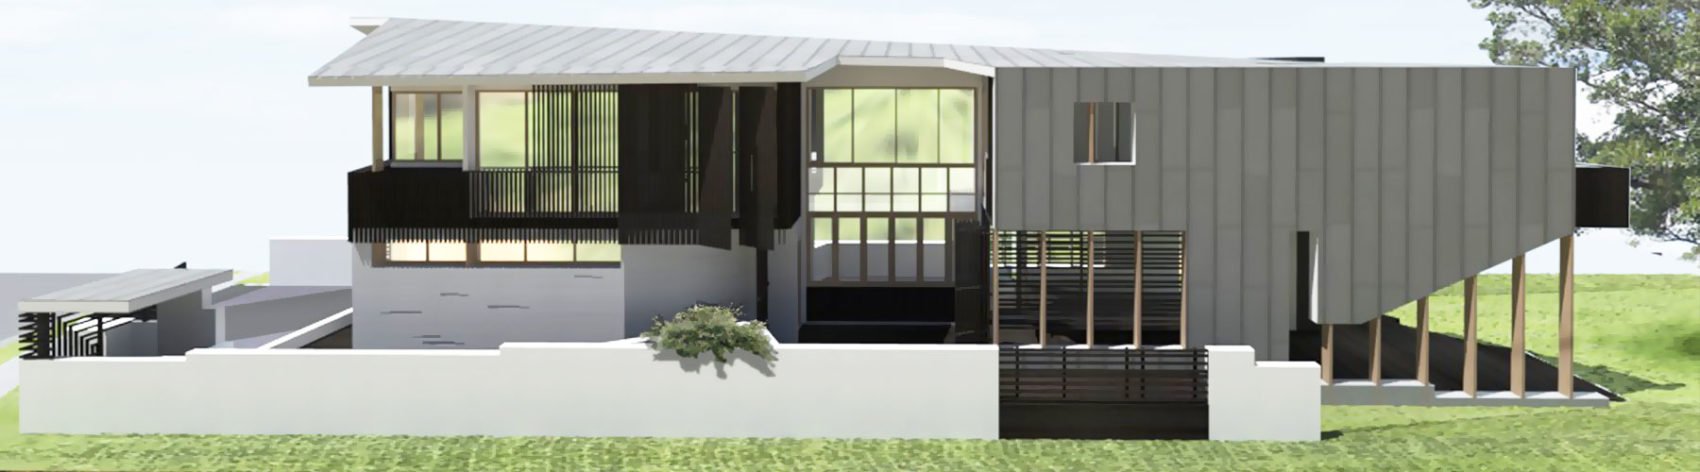 Bulimba House | Featured image for the Building Design Management Service page from Clements Clarke Architects.